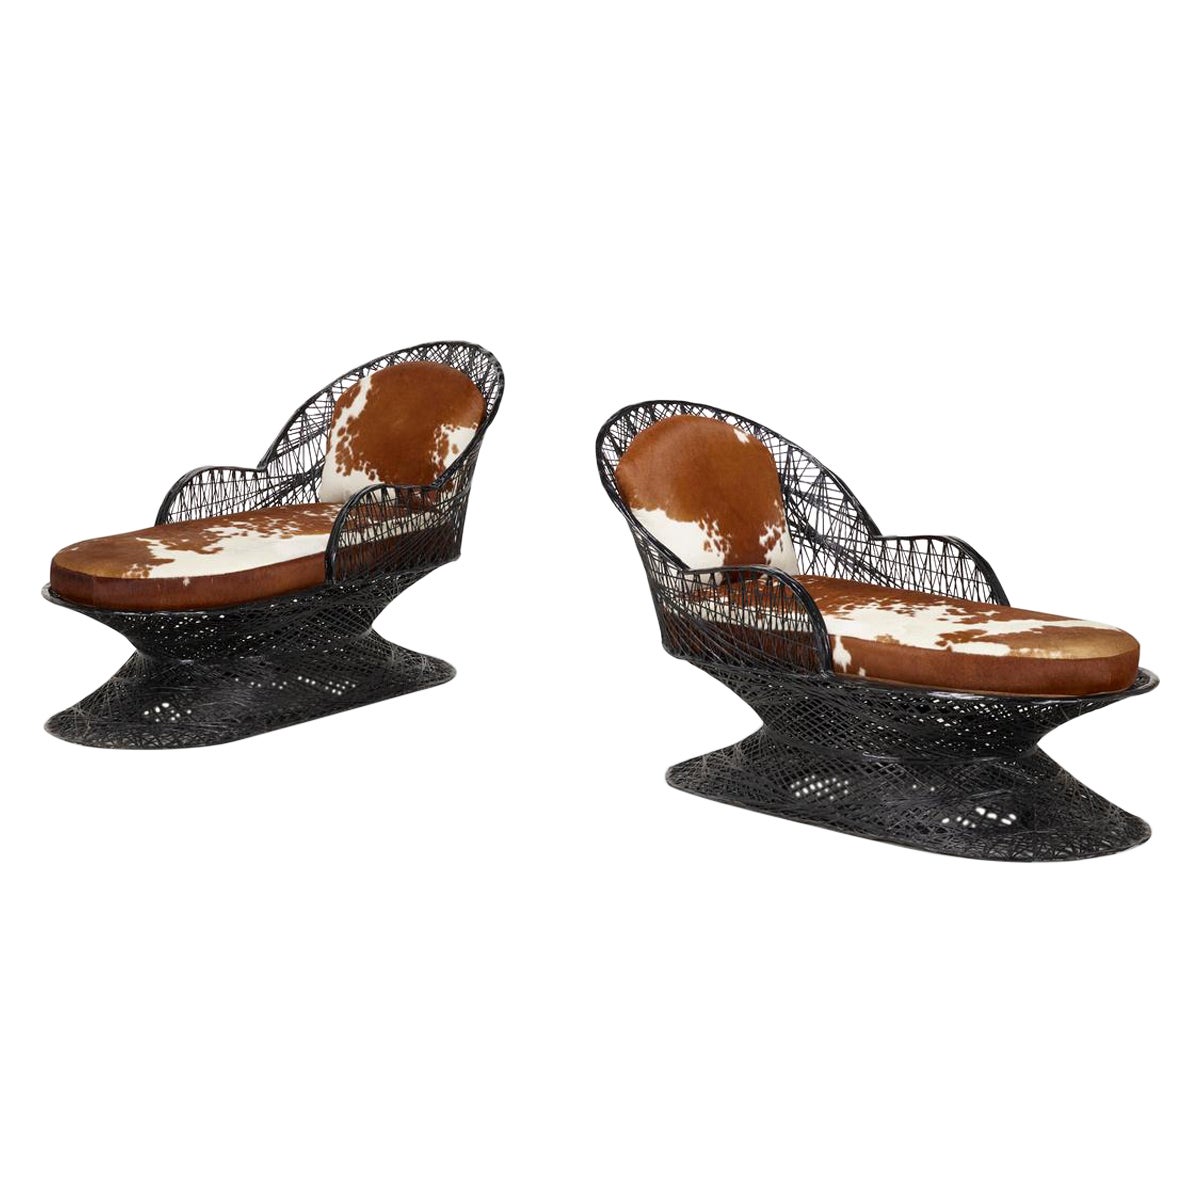 Pair of Chaise Longue in Lacquered Resin and Cowhide by Russel Woodard